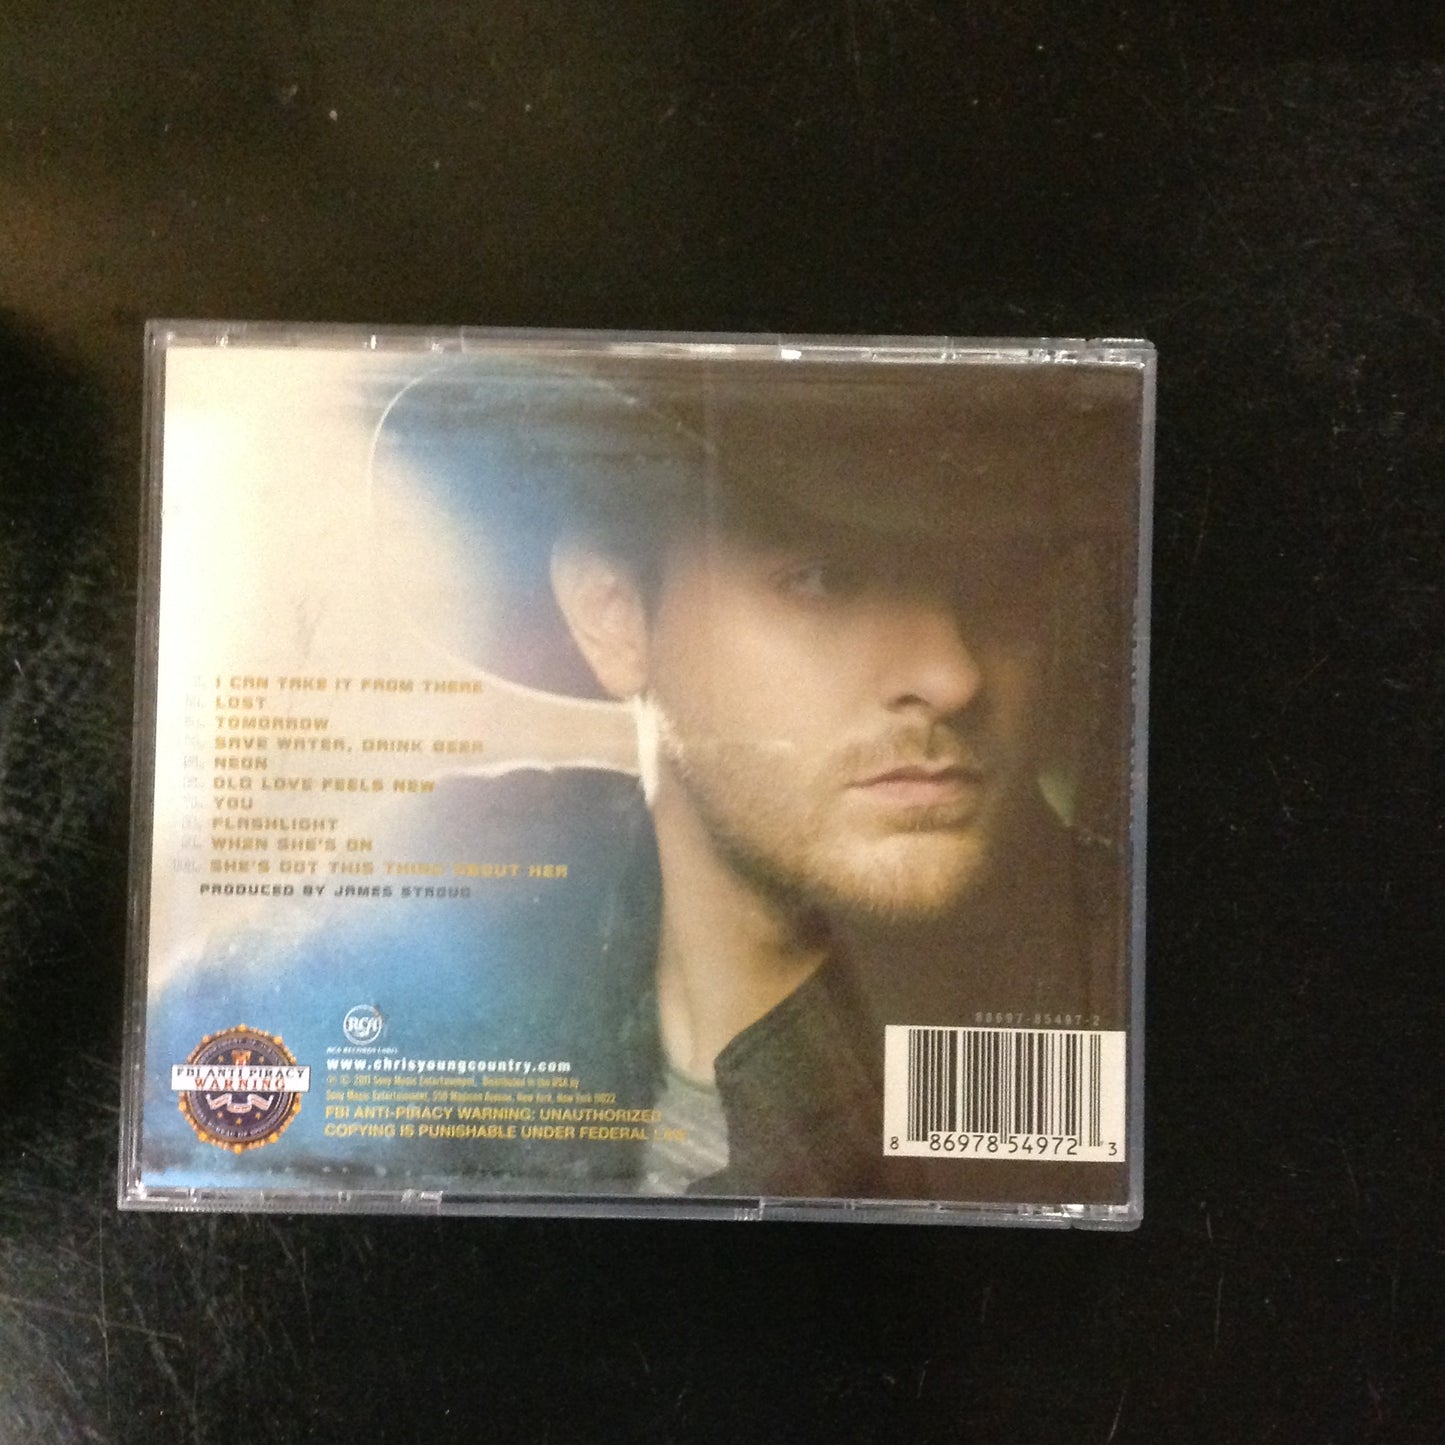 CD Chris Young Neon Country 88697-85497-2 2011 folk world